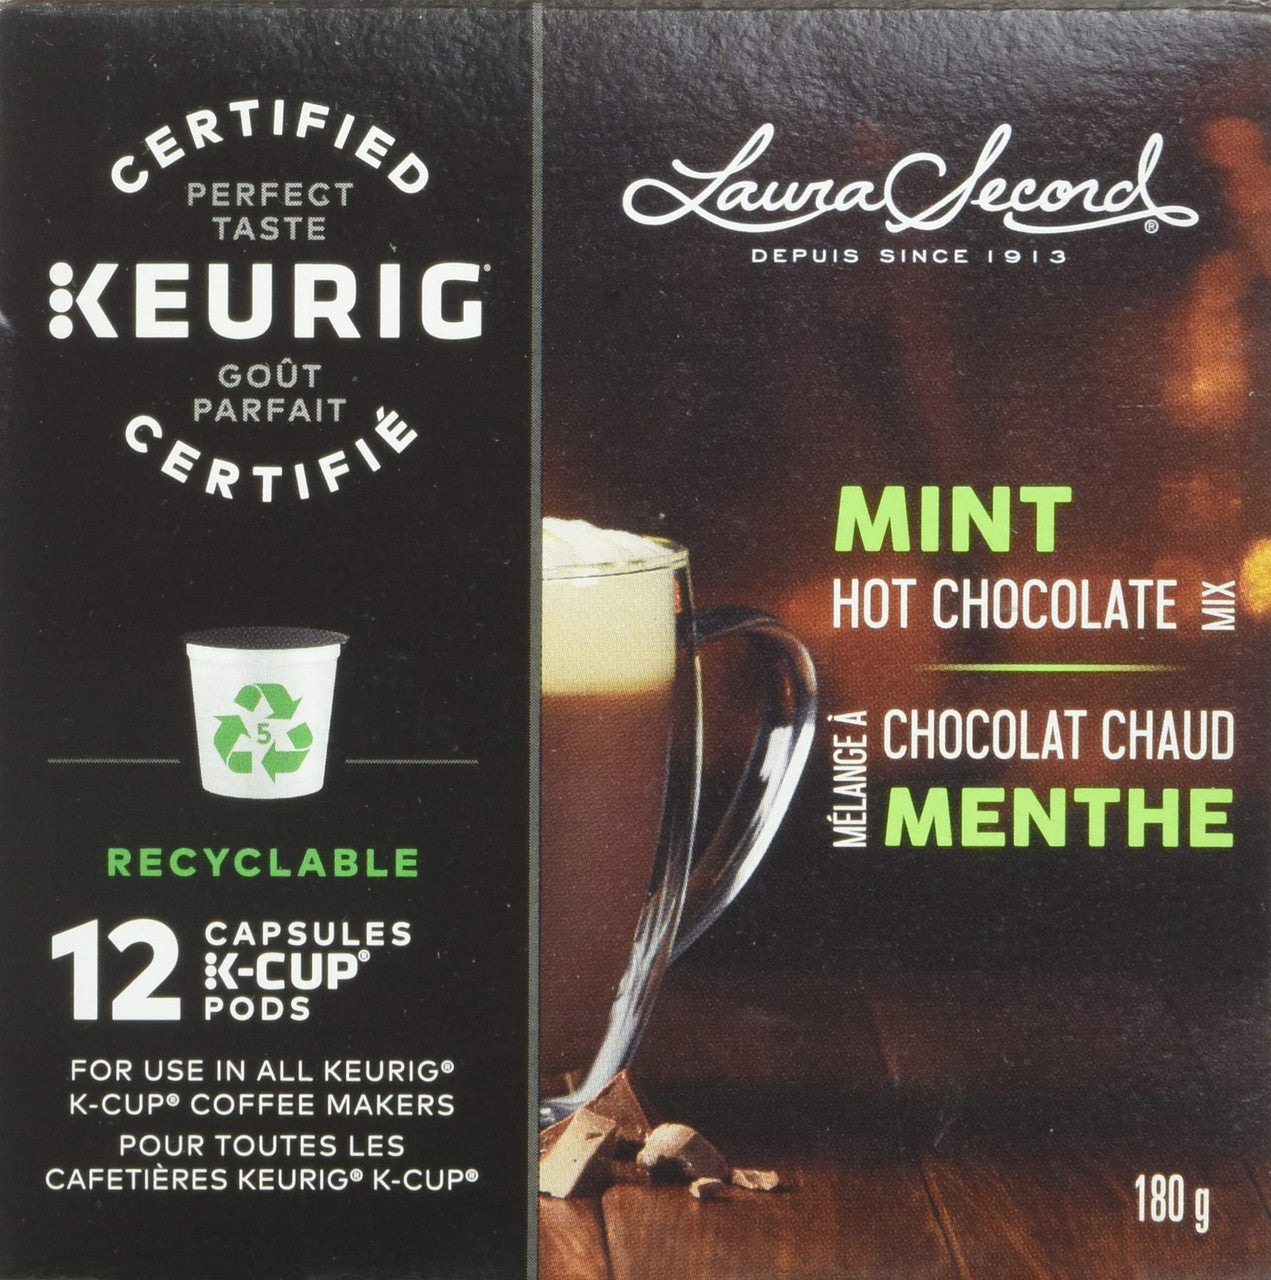 Laura Secord Mint Hot Chocolate Mix for Keurig K-cup, 12 pods, 180g {Imported from Canada}